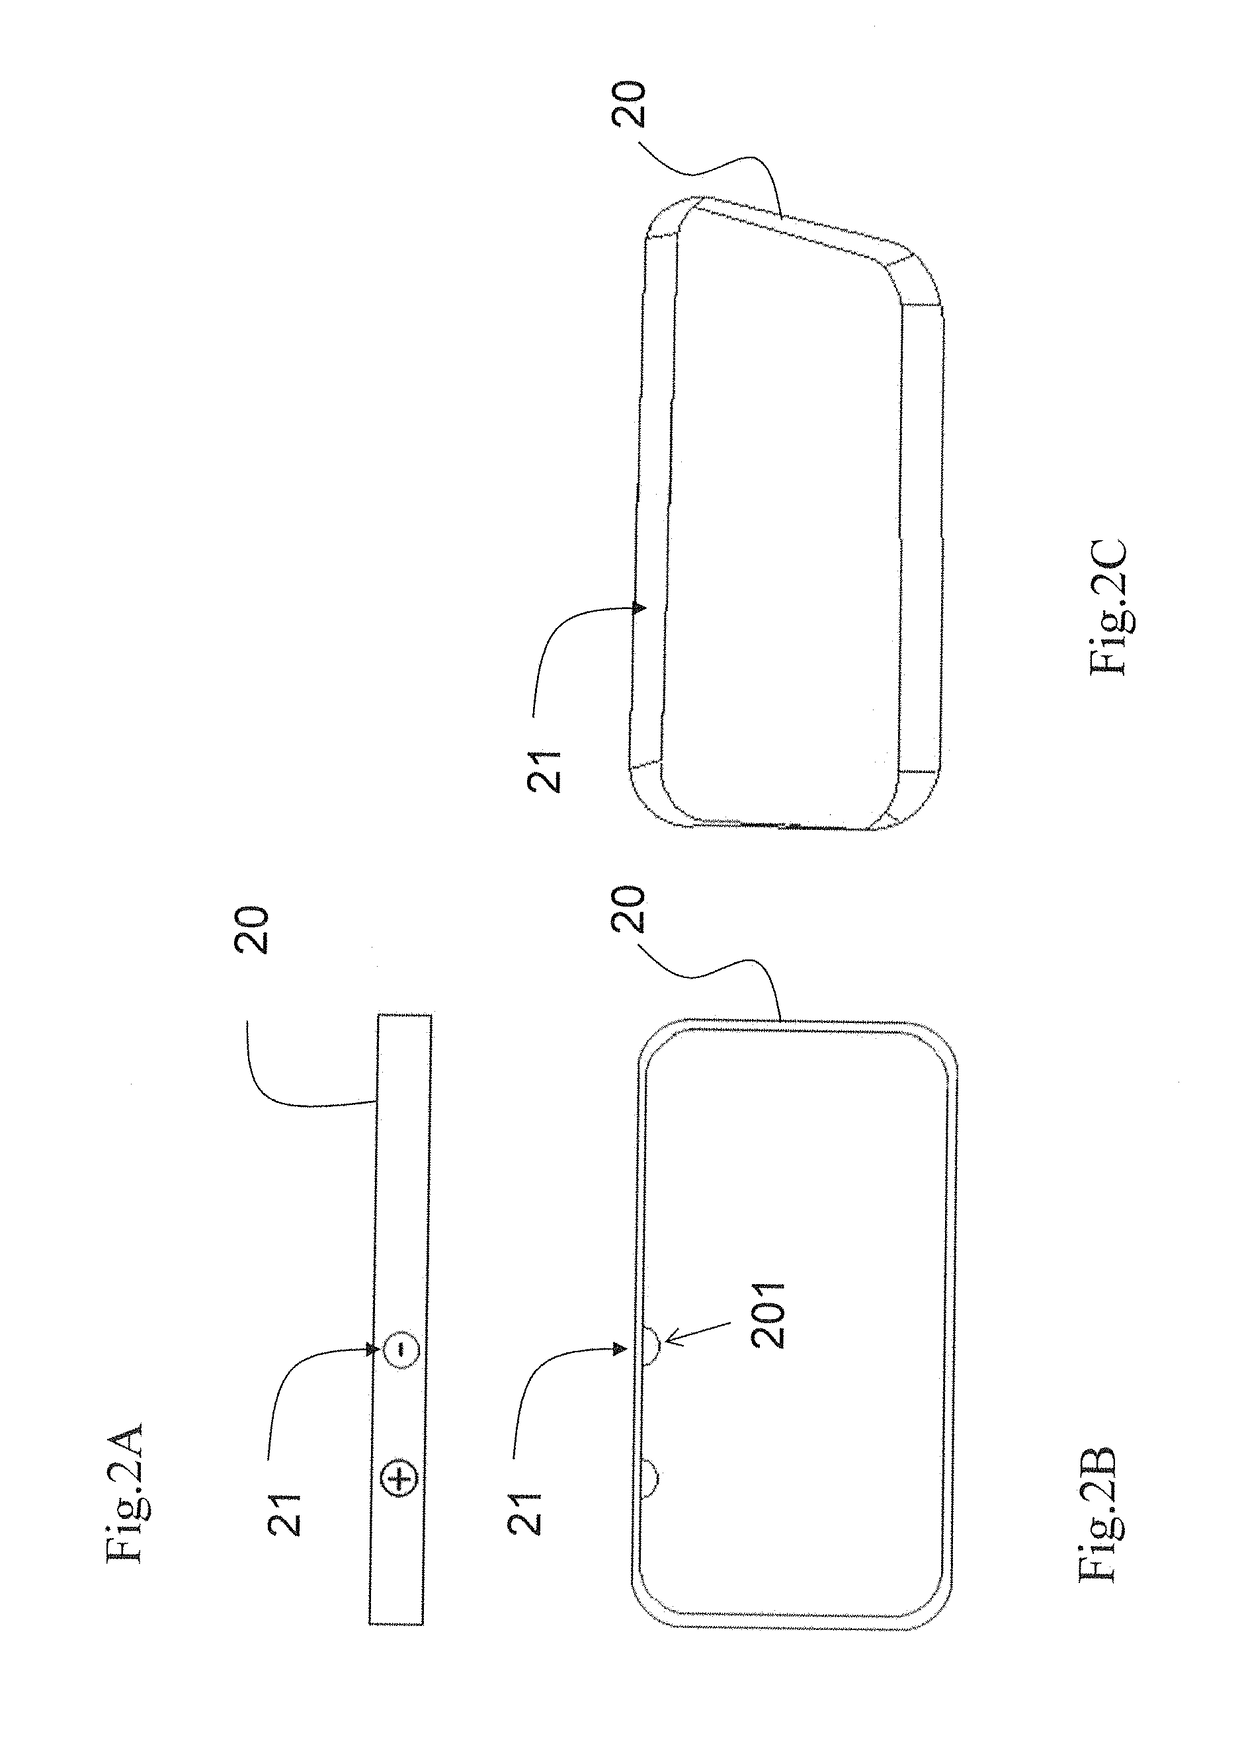 Embedded button for an electronic device